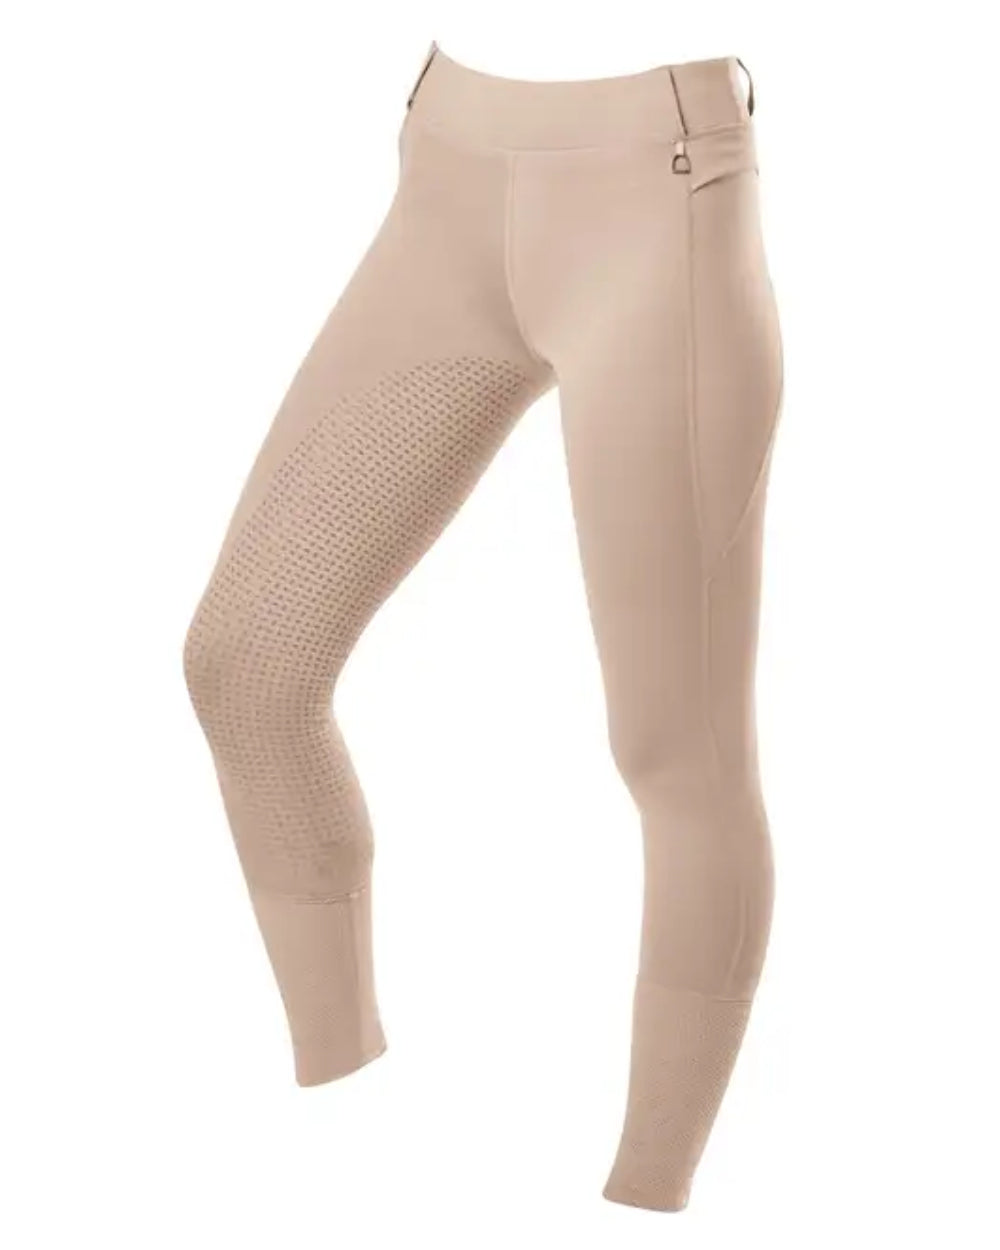 Beige Coloured Dublin Childrens Cool It Everyday Riding Tights On A White Background 